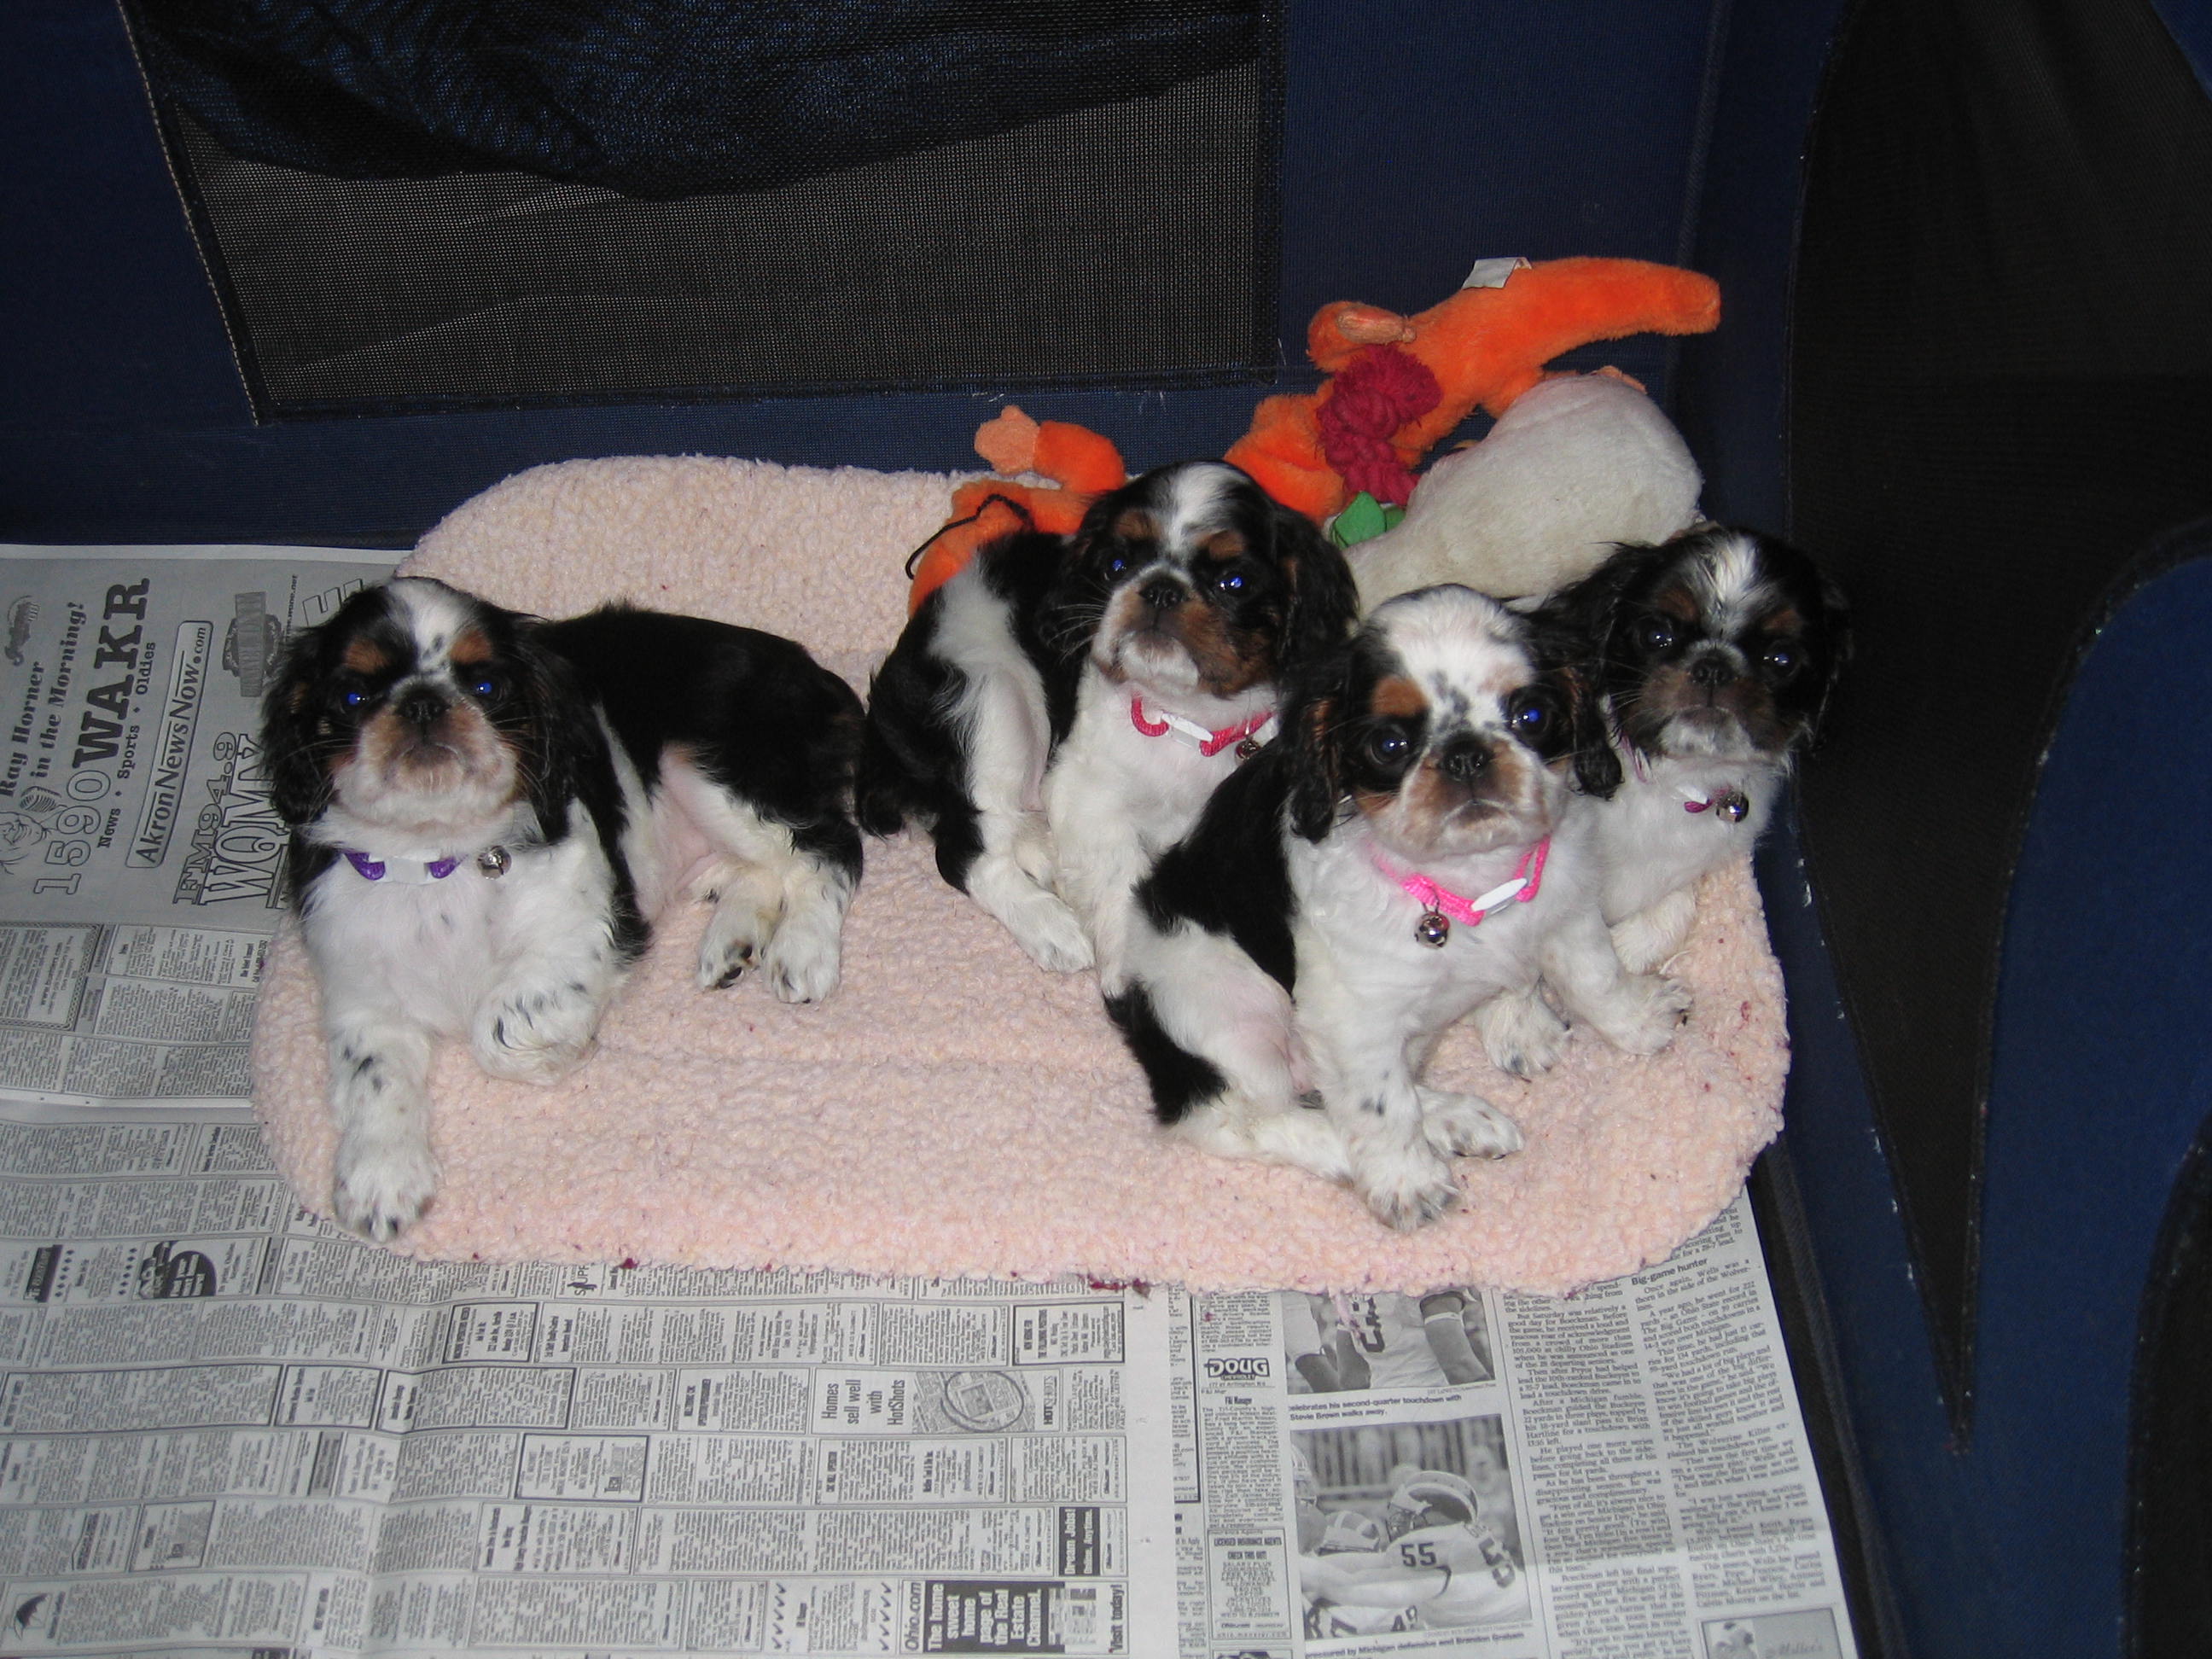 Puppies after their bath 11-25